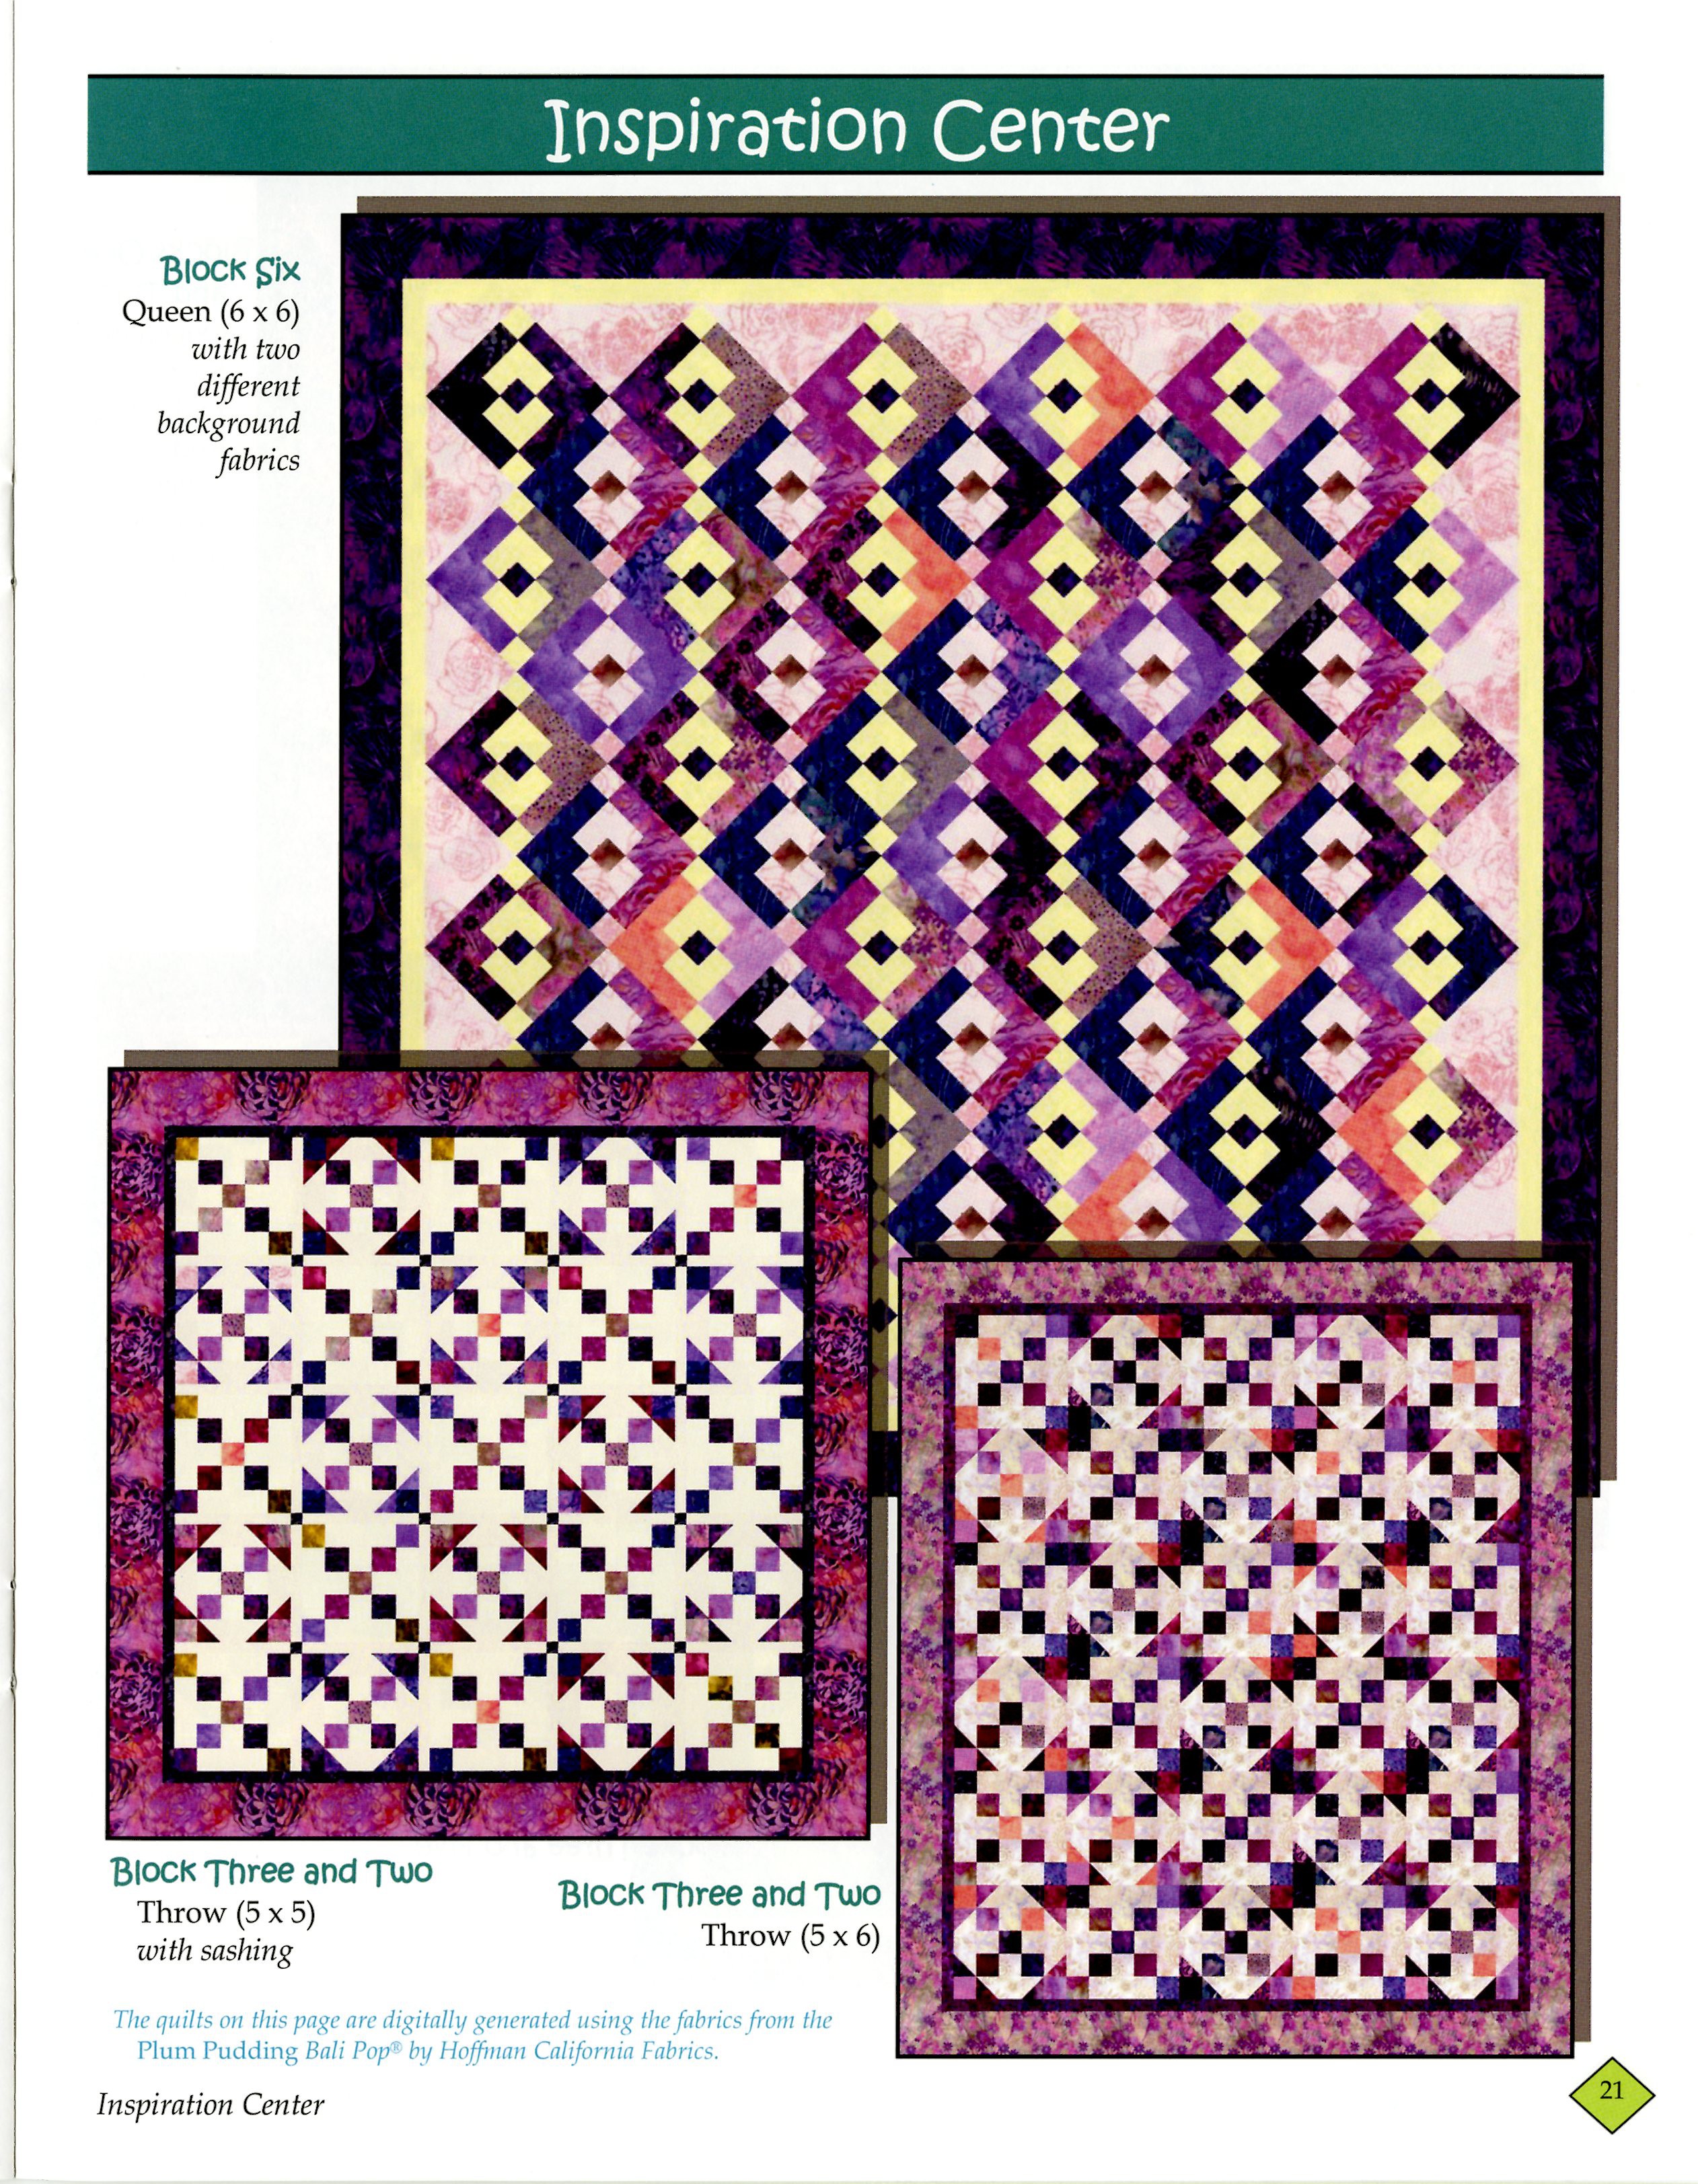 Cozy Quilt Designs Strip Six Softcover